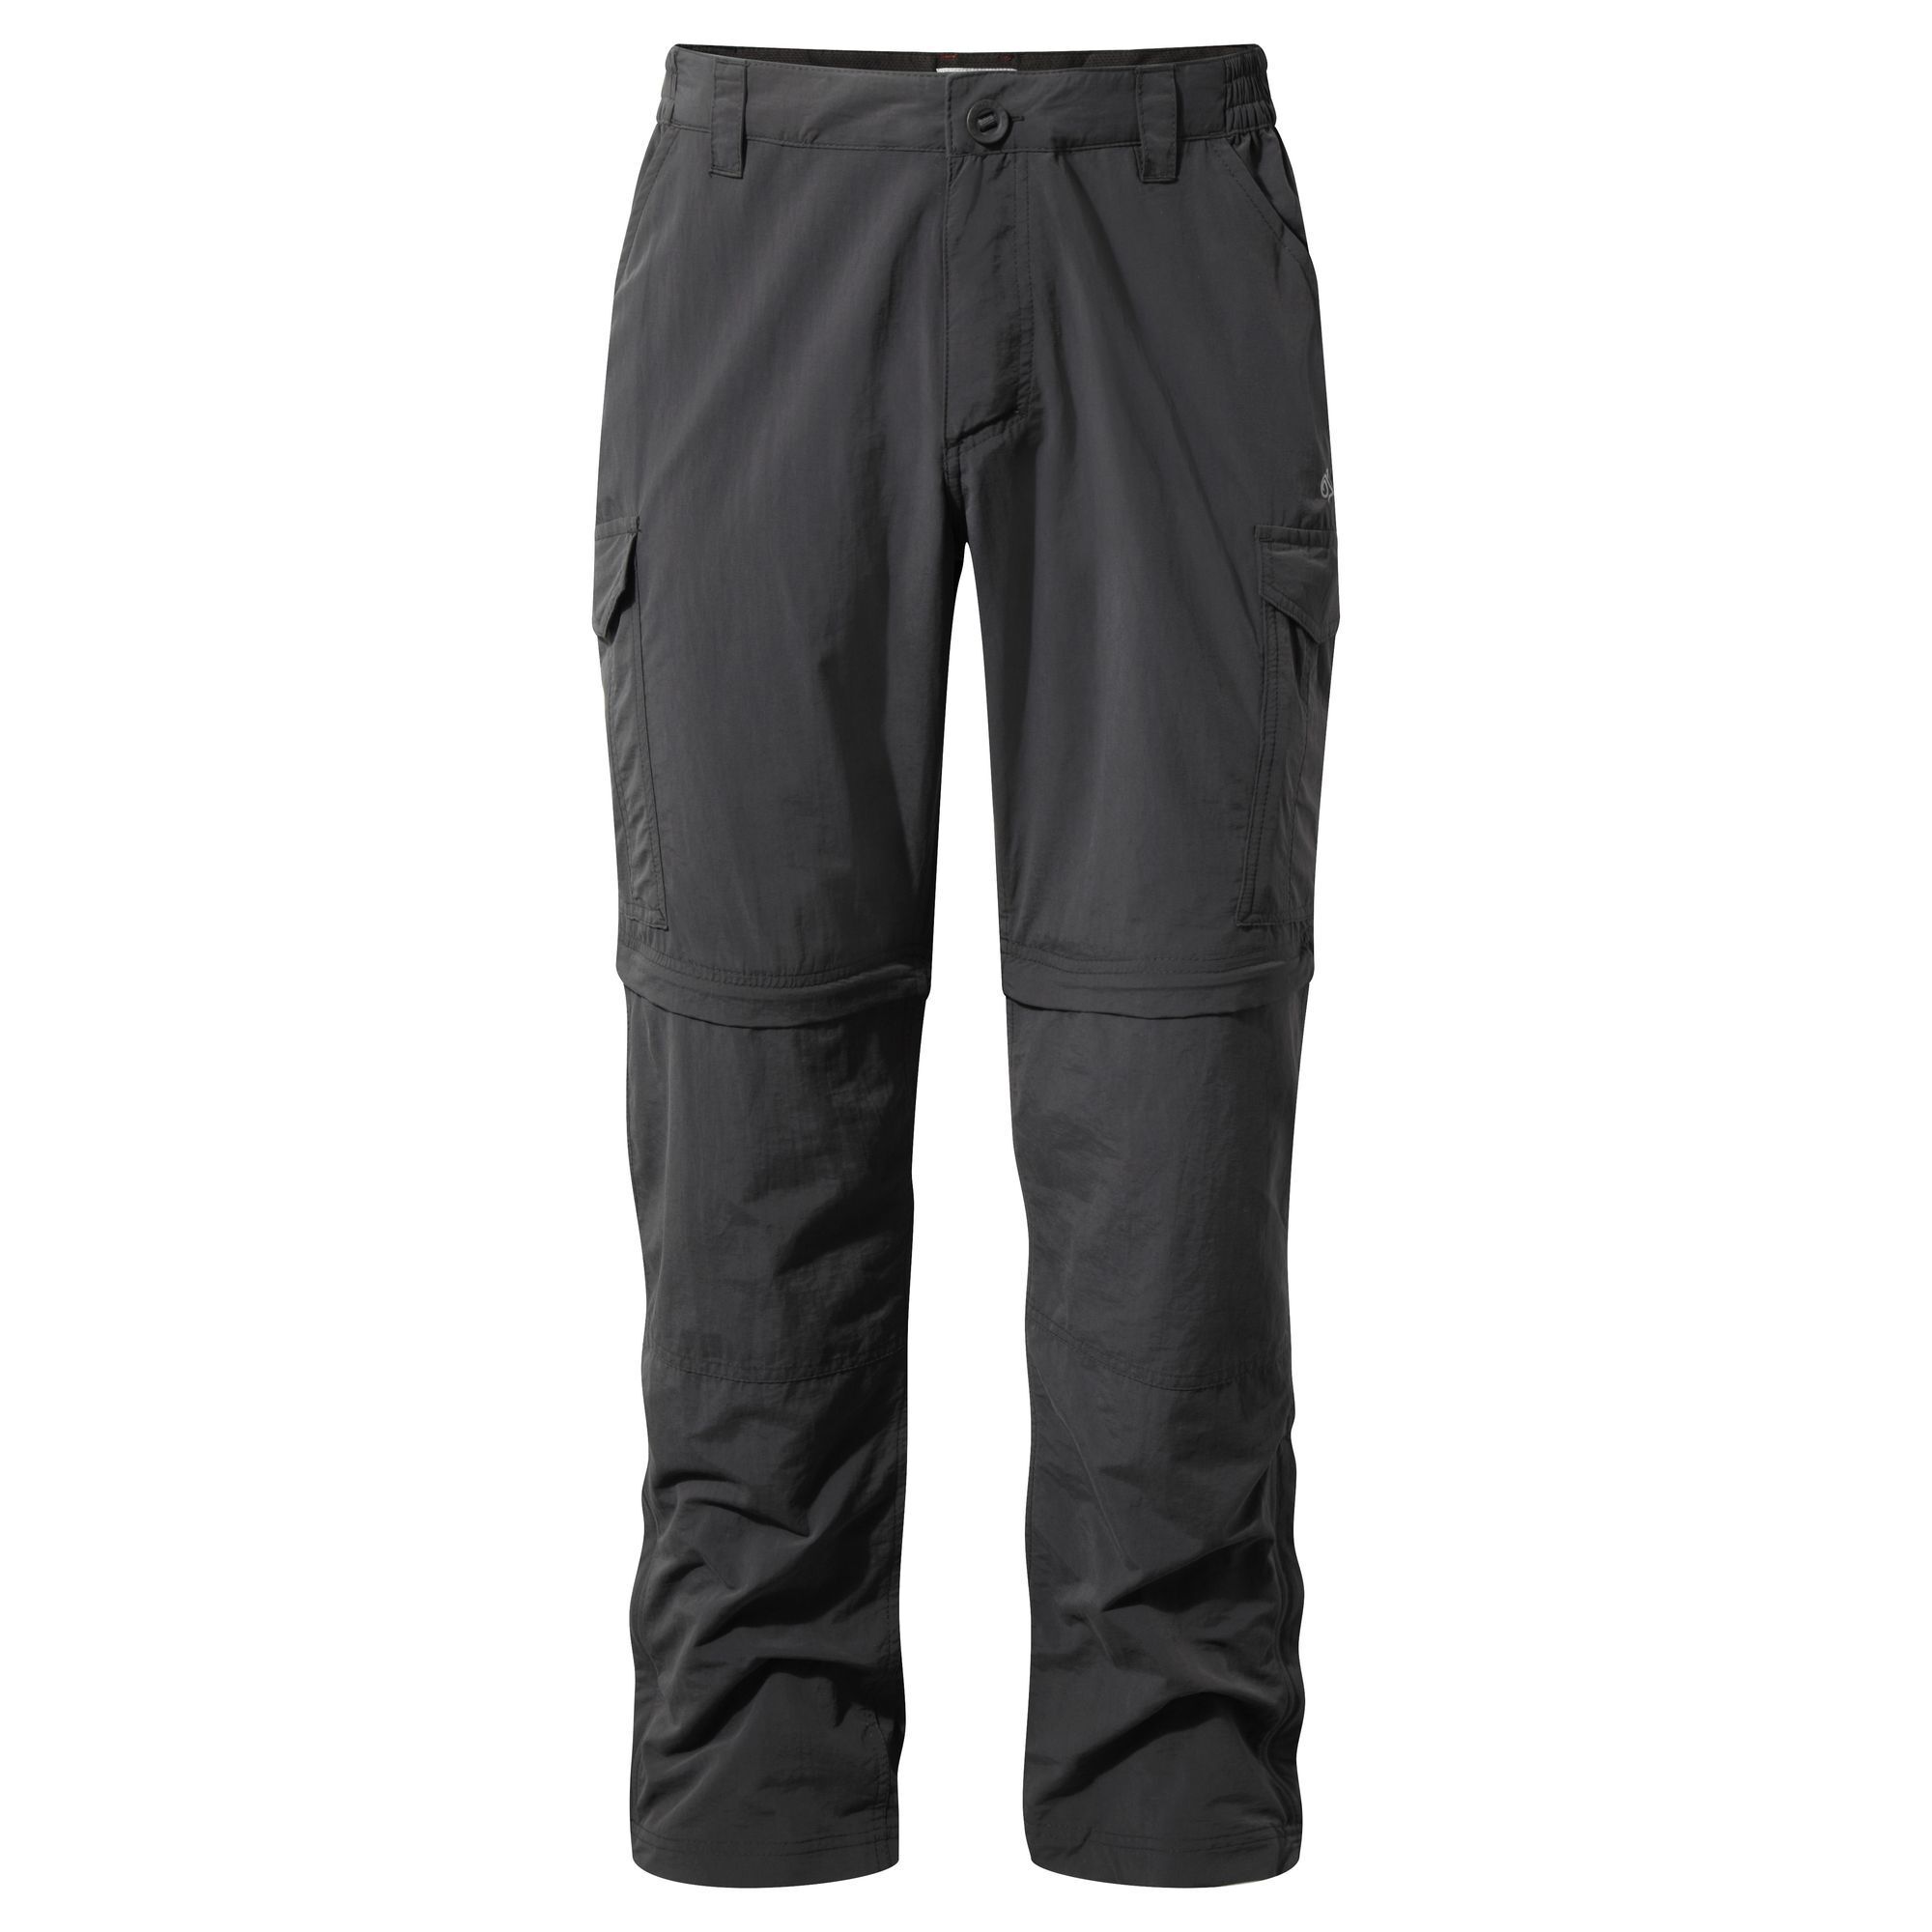 Craghoppers - Nosilife Convertible Trousers - Walking trousers - Men's